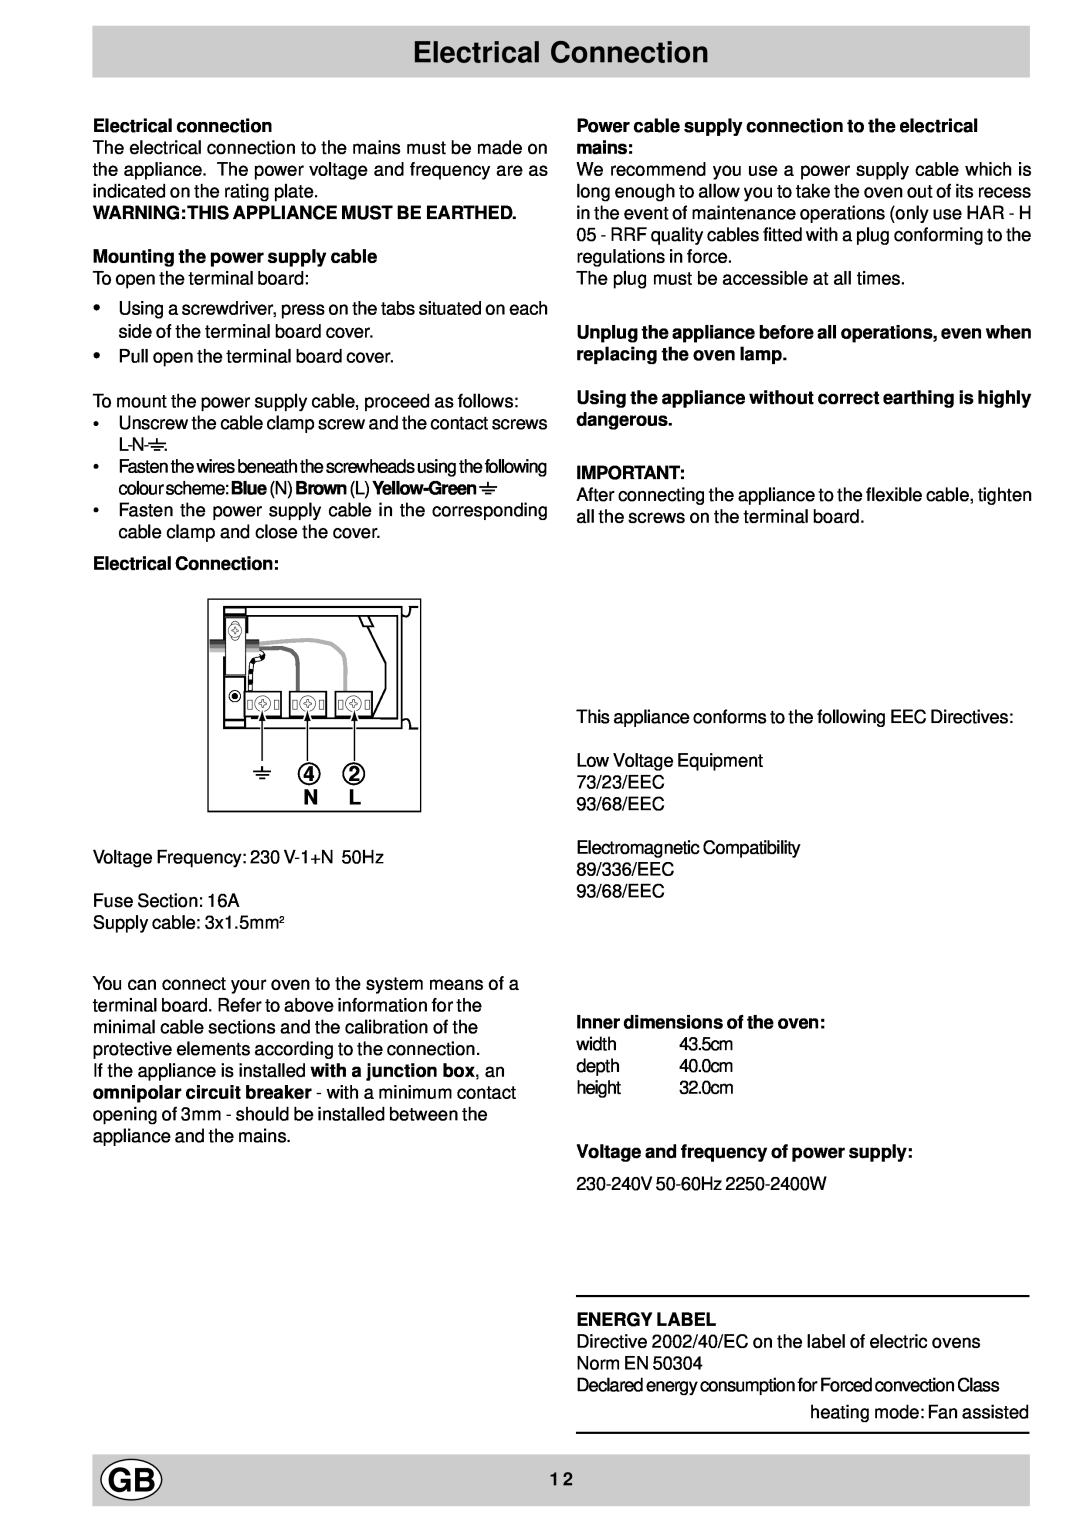 Hotpoint BS43, BS53 manual Electrical Connection, 4 2 N L 